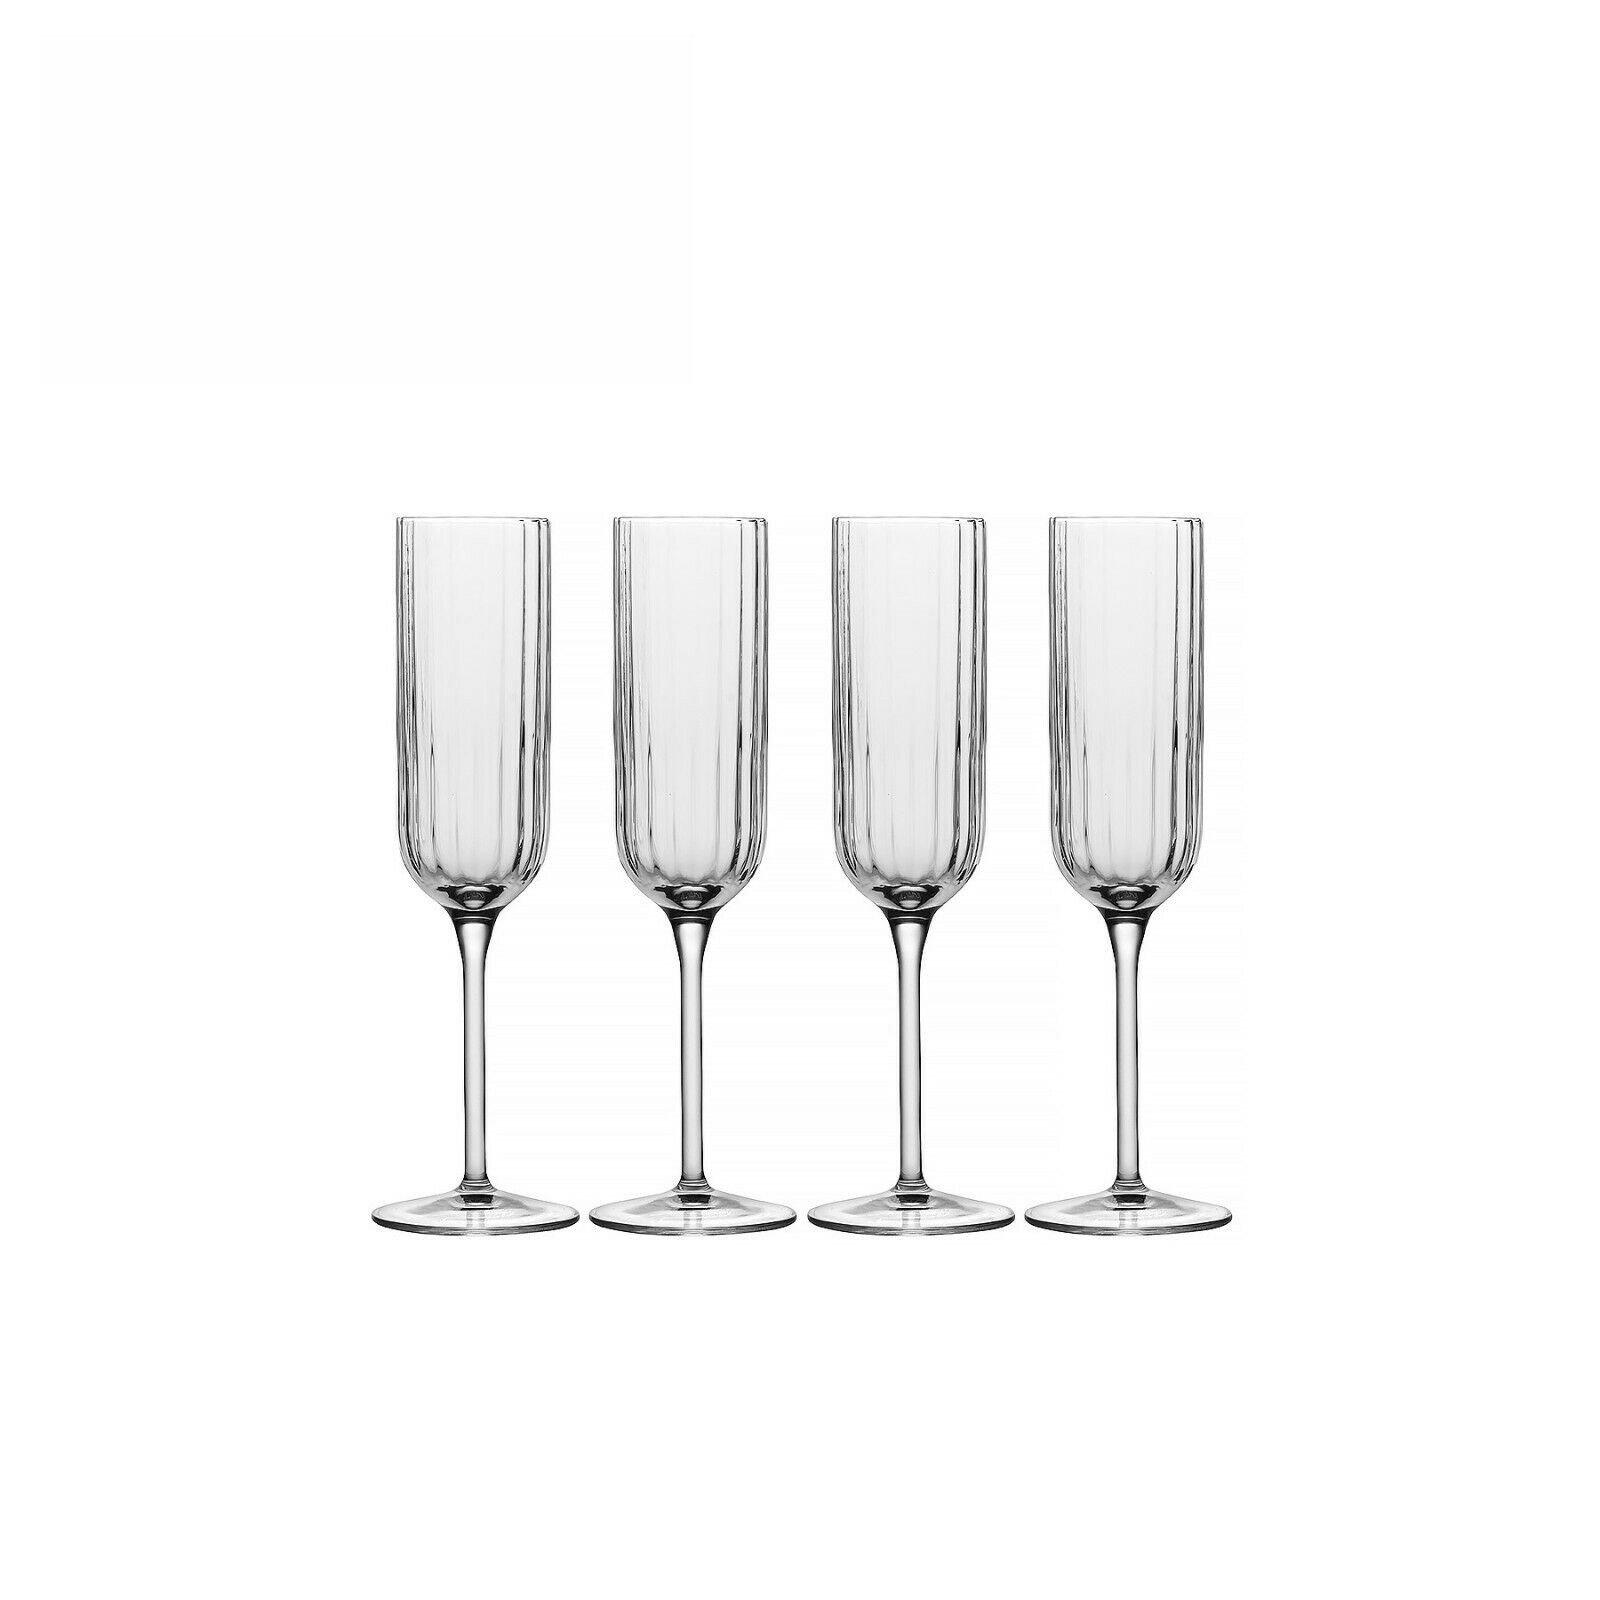 Champagne Flutes Crystal Set of 4, Vintage Prosecco Glasses, 210ml - Perfect Gift